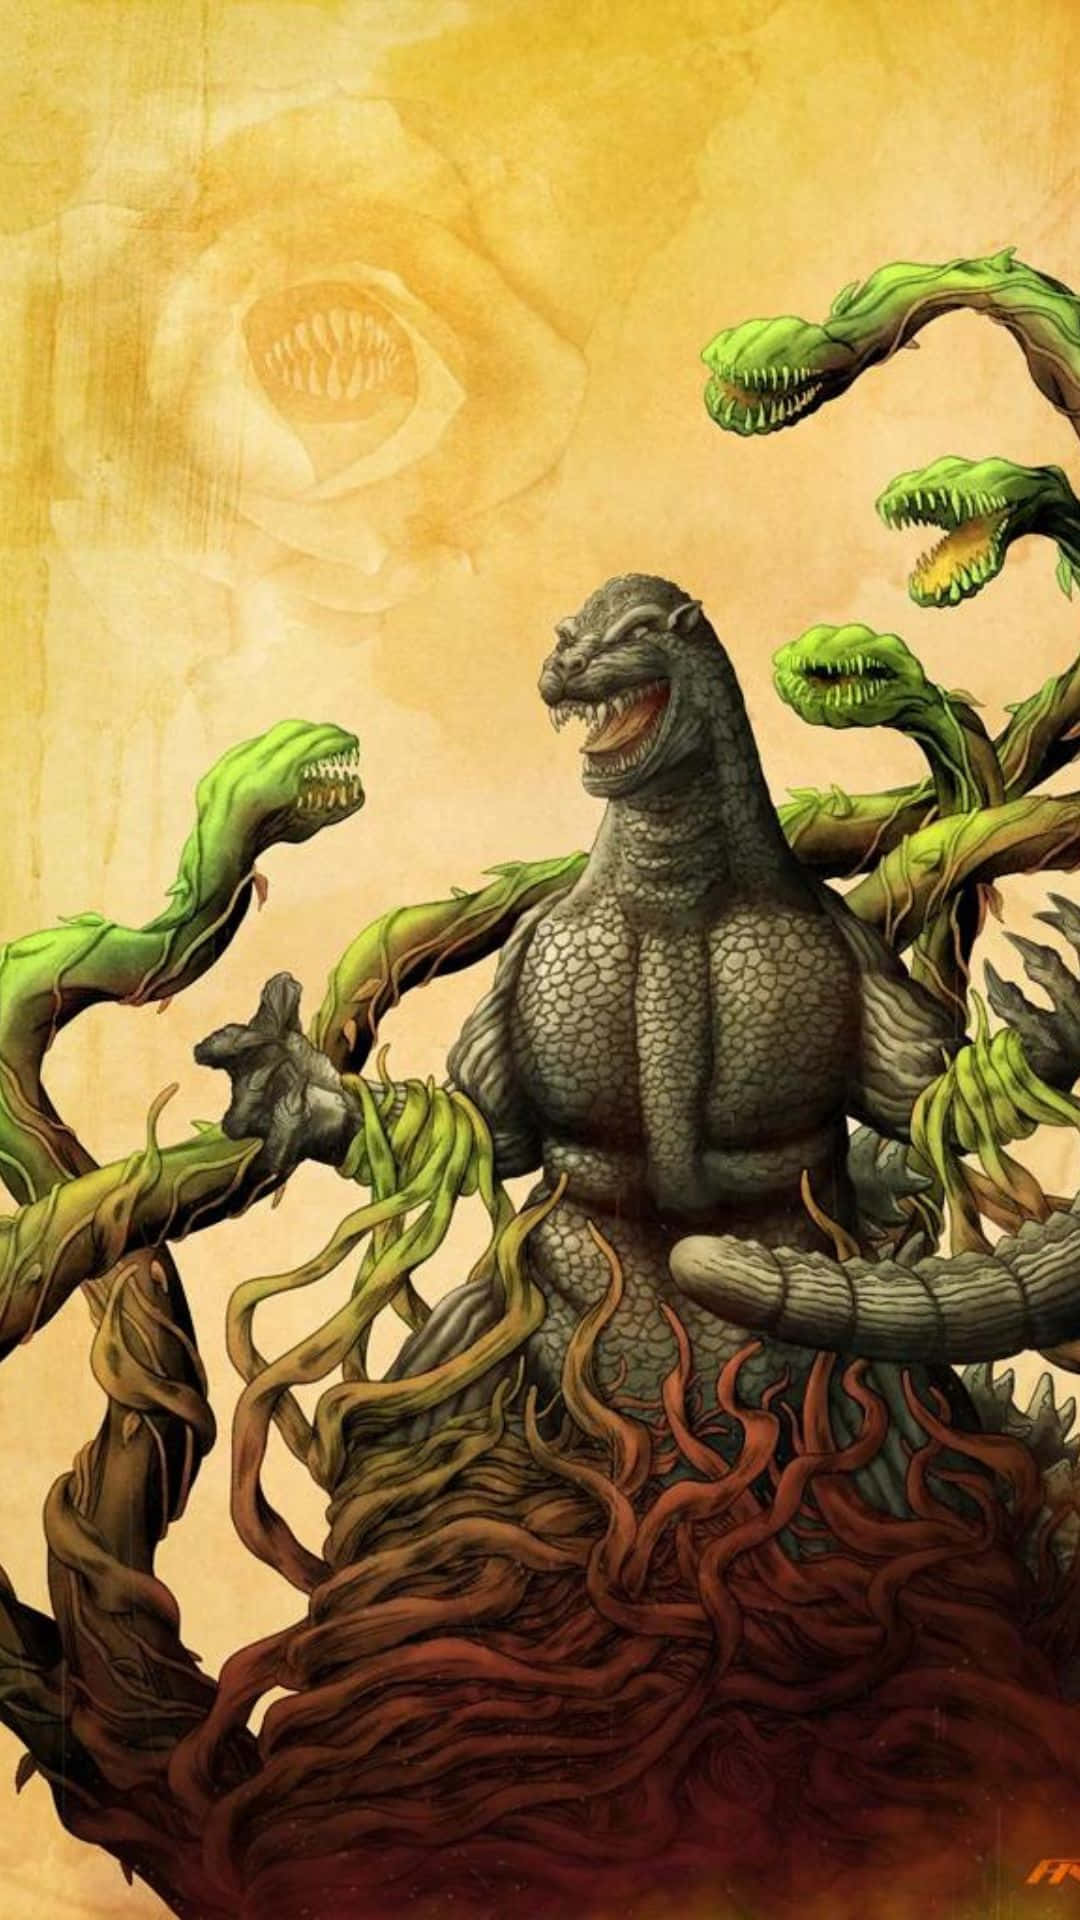 Godzilla and Biollante face off in an epic battle Wallpaper